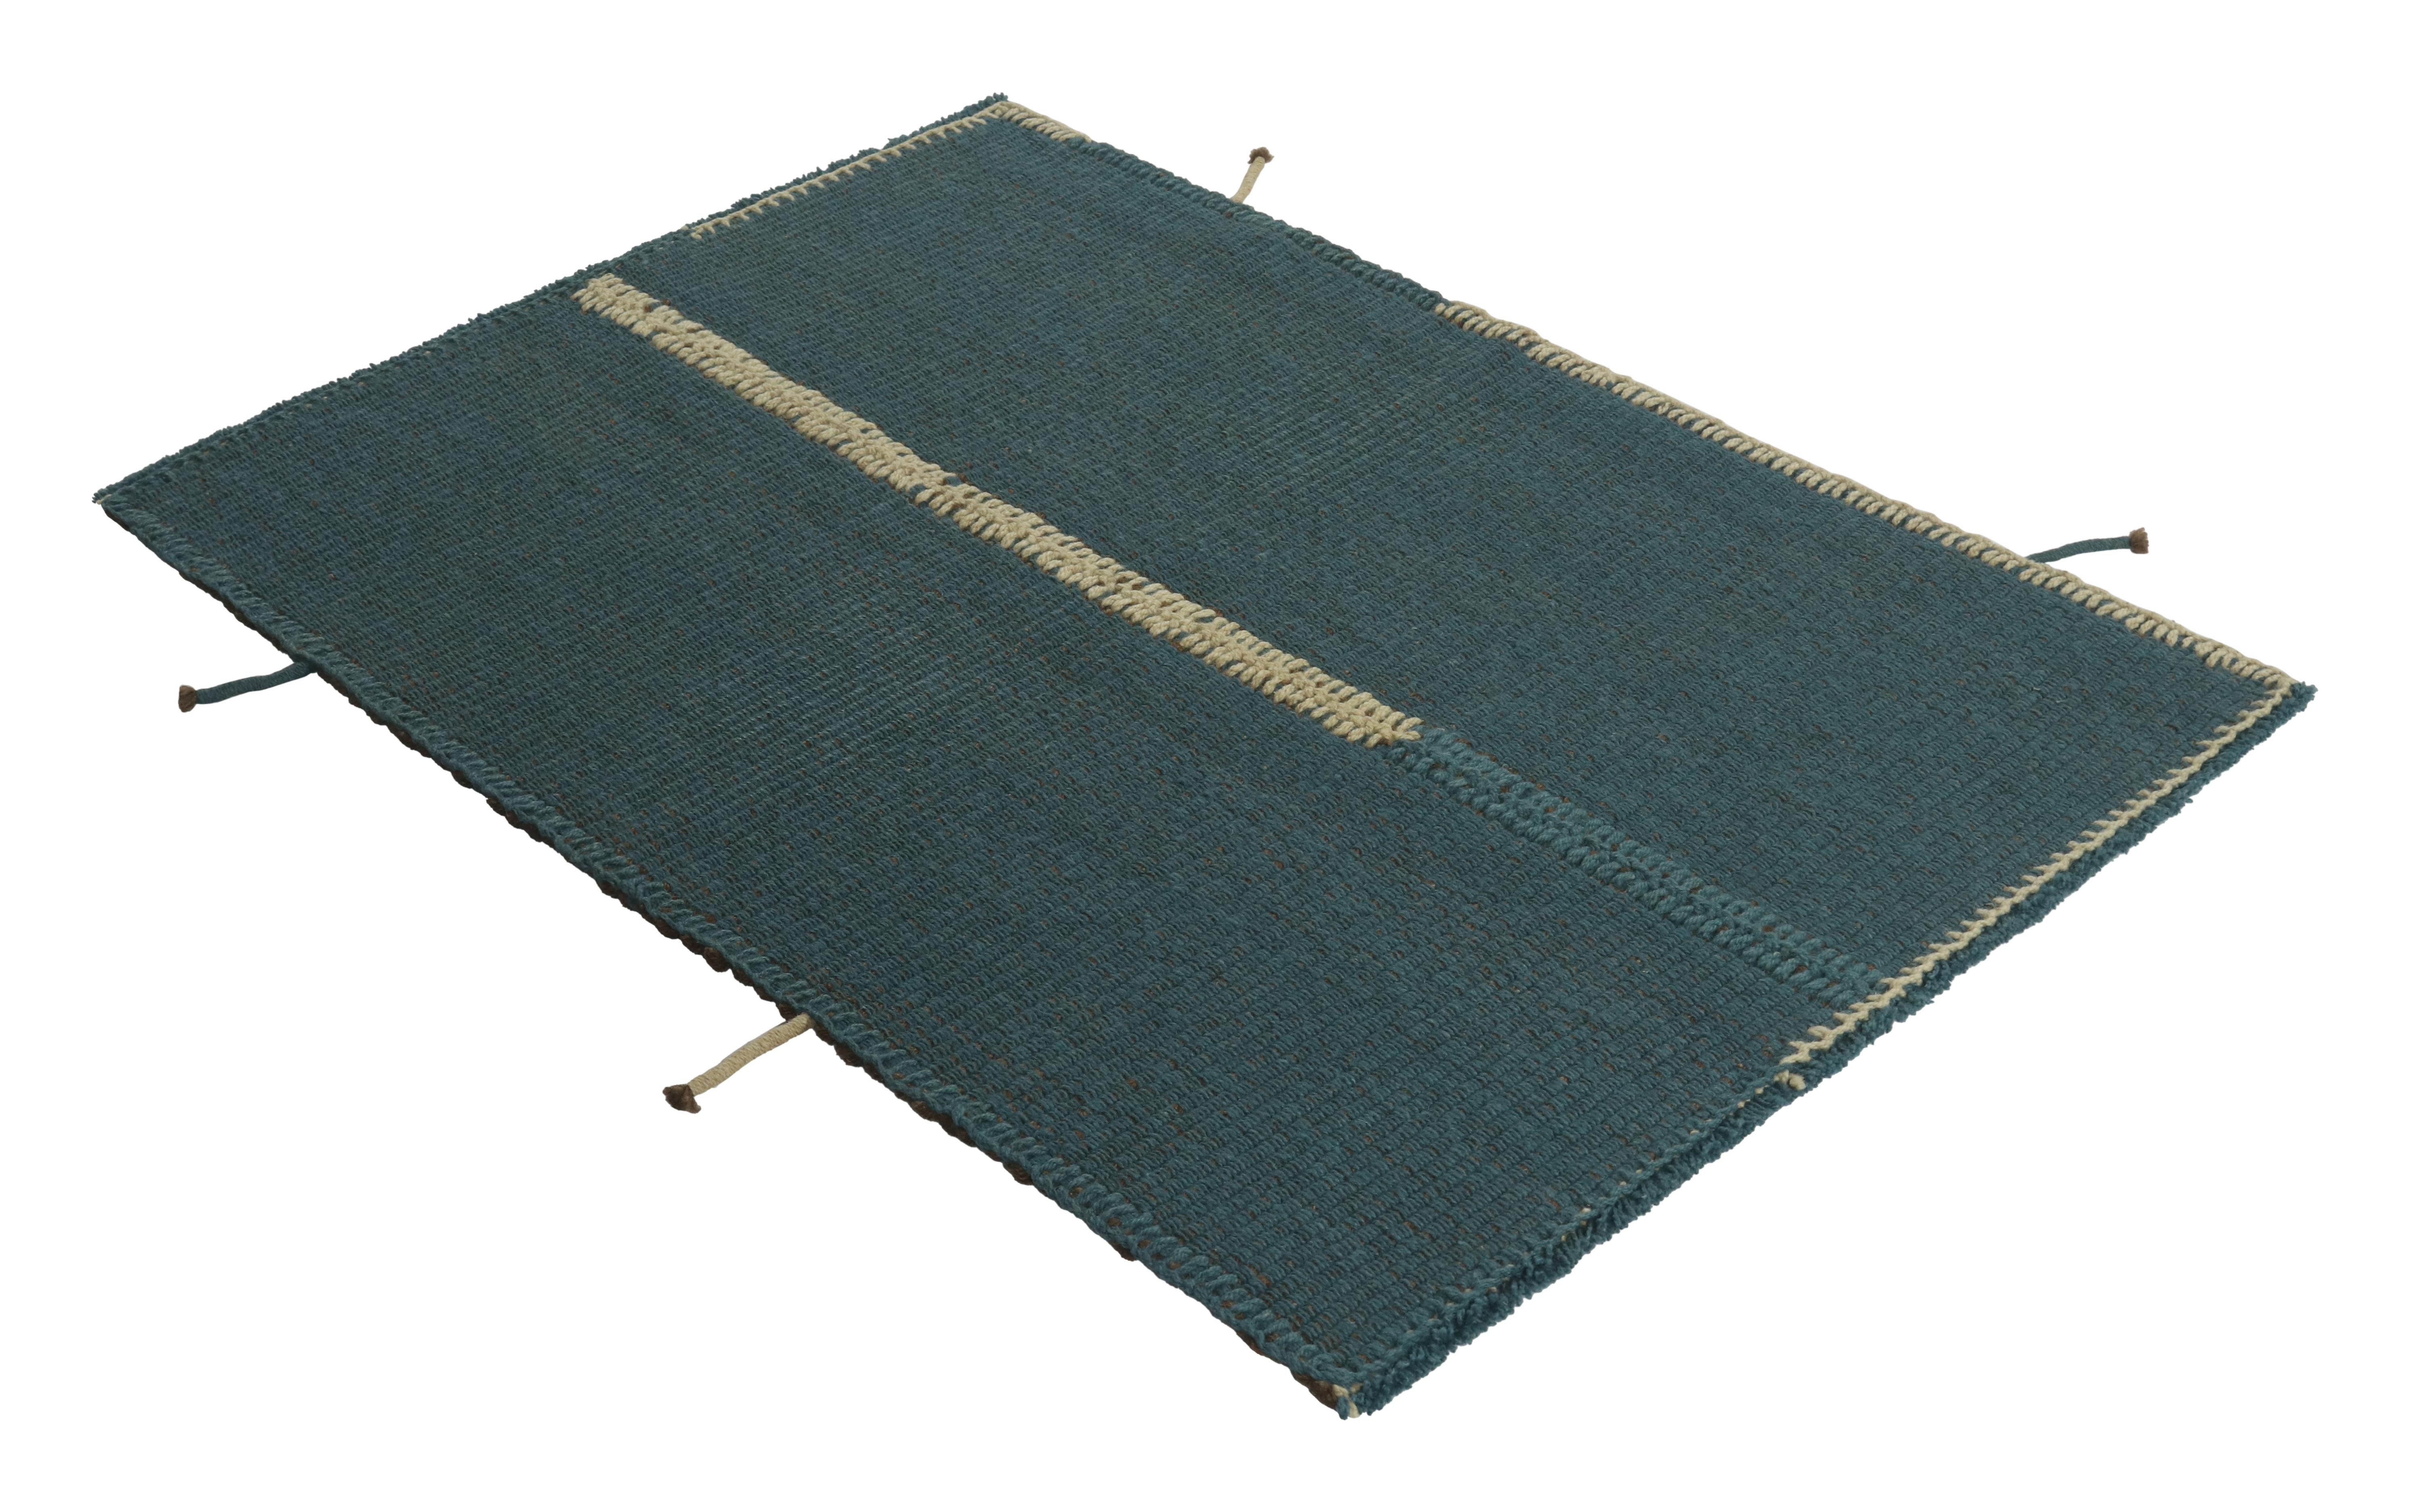 Handwoven in wool, a gift-sized 3x4 Kilim from an innovative new contemporary flat weave collection by Rug & Kilim.
On the Design:
“Rez Kilim” connotes a modern take on classic panel weaving—this edition enjoying an almost ocean blue with brown